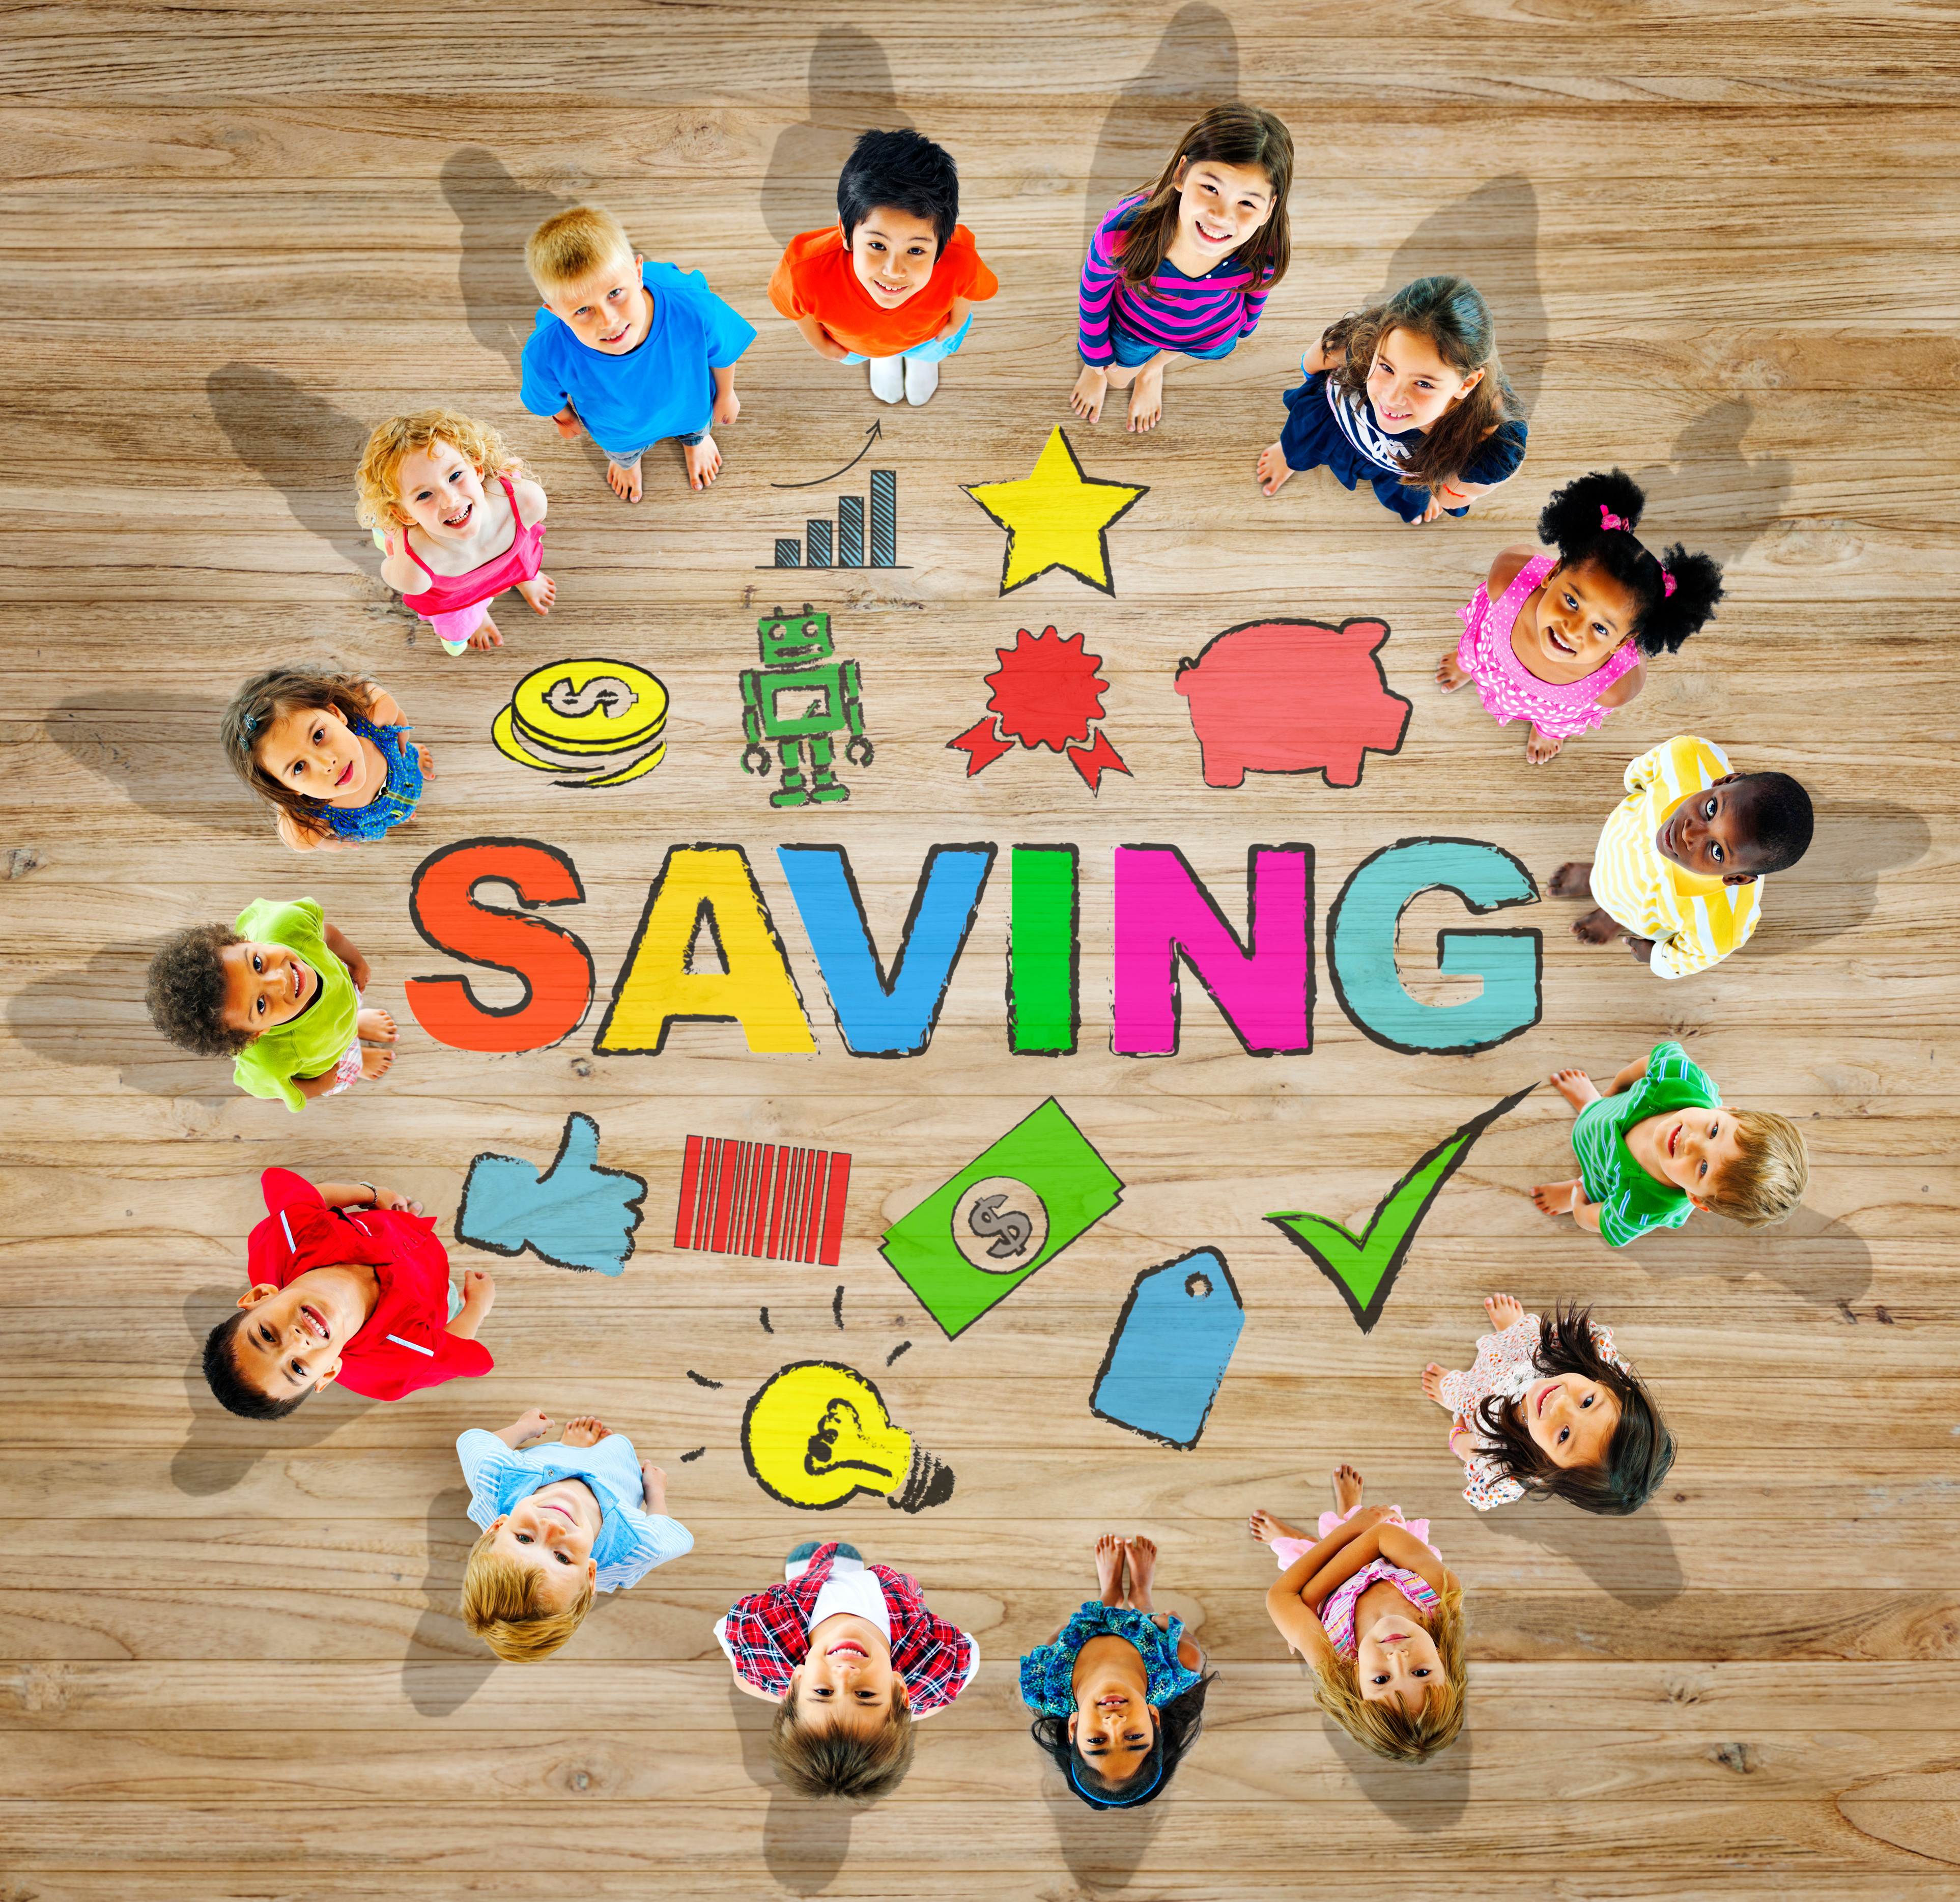 Multiethnic Group of Children with Savings Concept